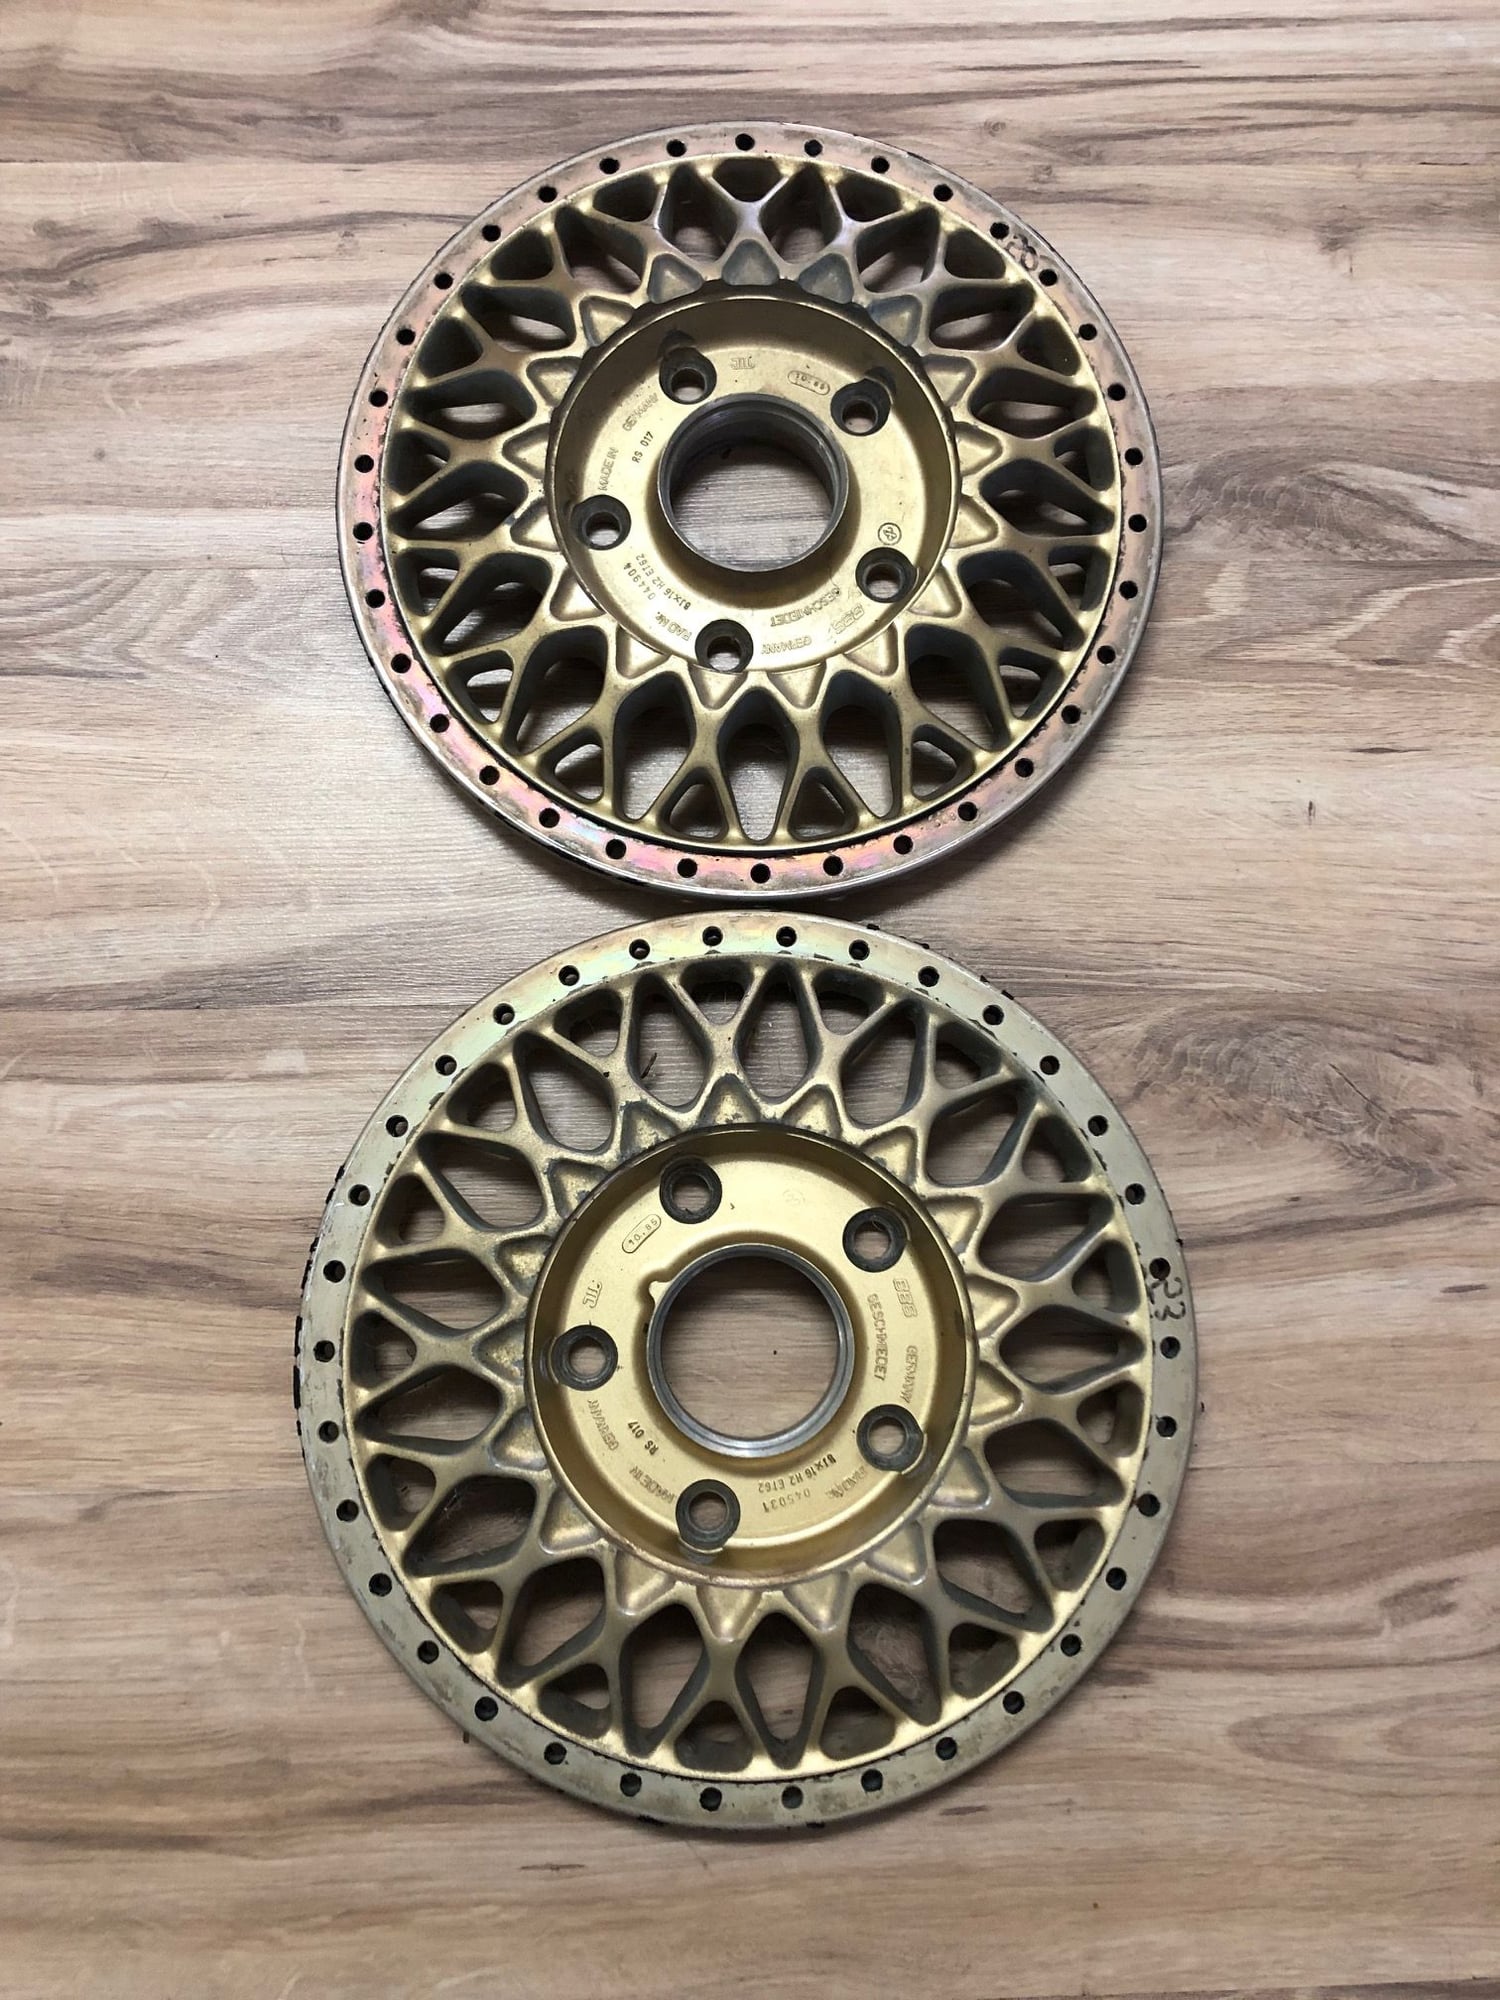 Wheels and Tires/Axles - FS: Pair of BBS RS 017 Wheel Centers - Used - New Smyrna Beach, FL 32168, United States